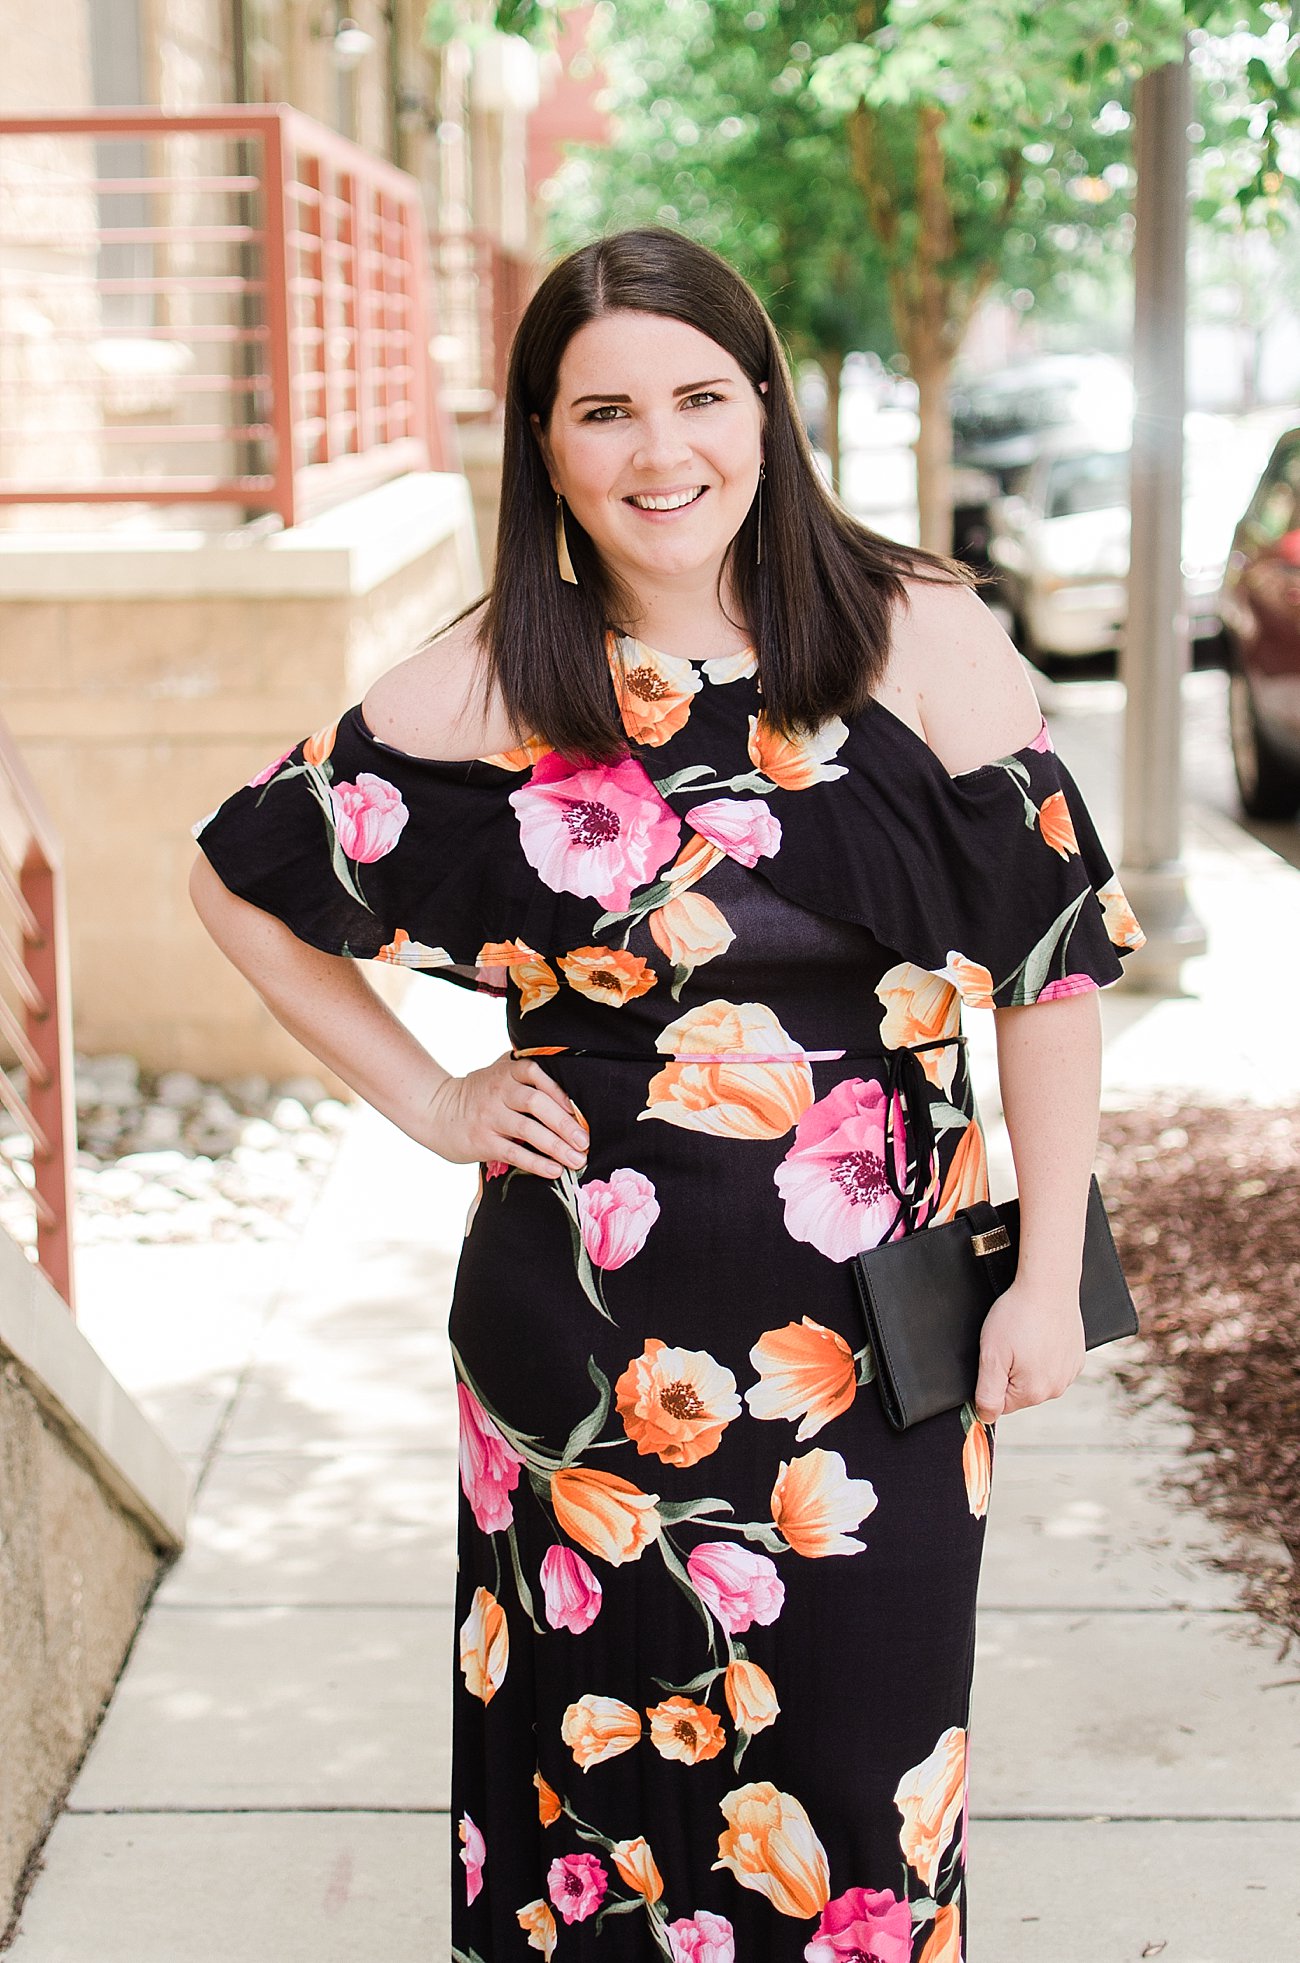 Ethical Fashion: Cold Shoulder Maxi Dress by ethical fashion blogger Still Being Molly